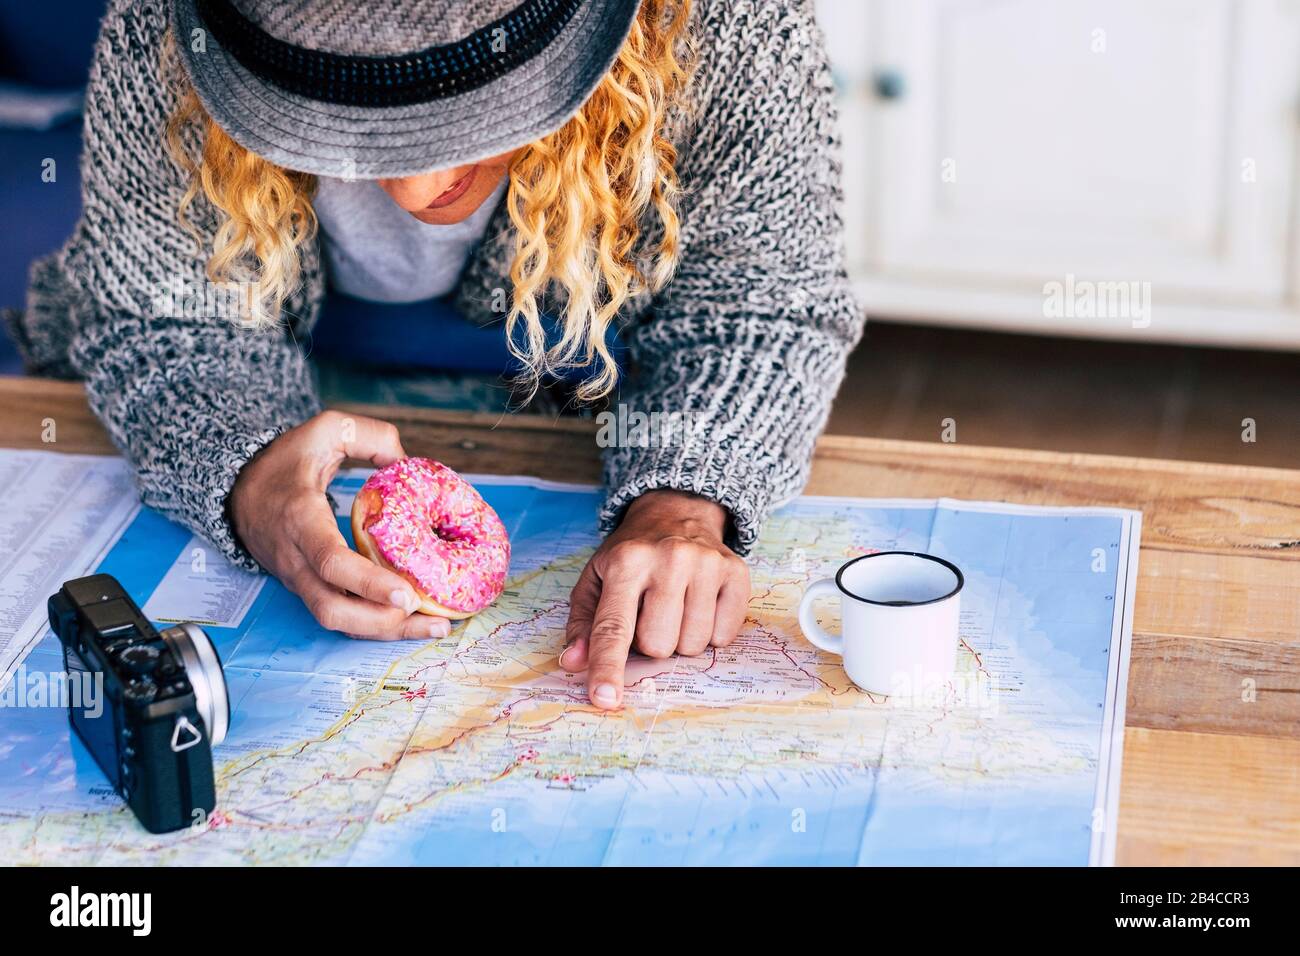 Alternative hipster travel young girl planning her next adventure trip on a island - paper old map on a wooden table and vintage camera - breakfast time for travelers people Stock Photo